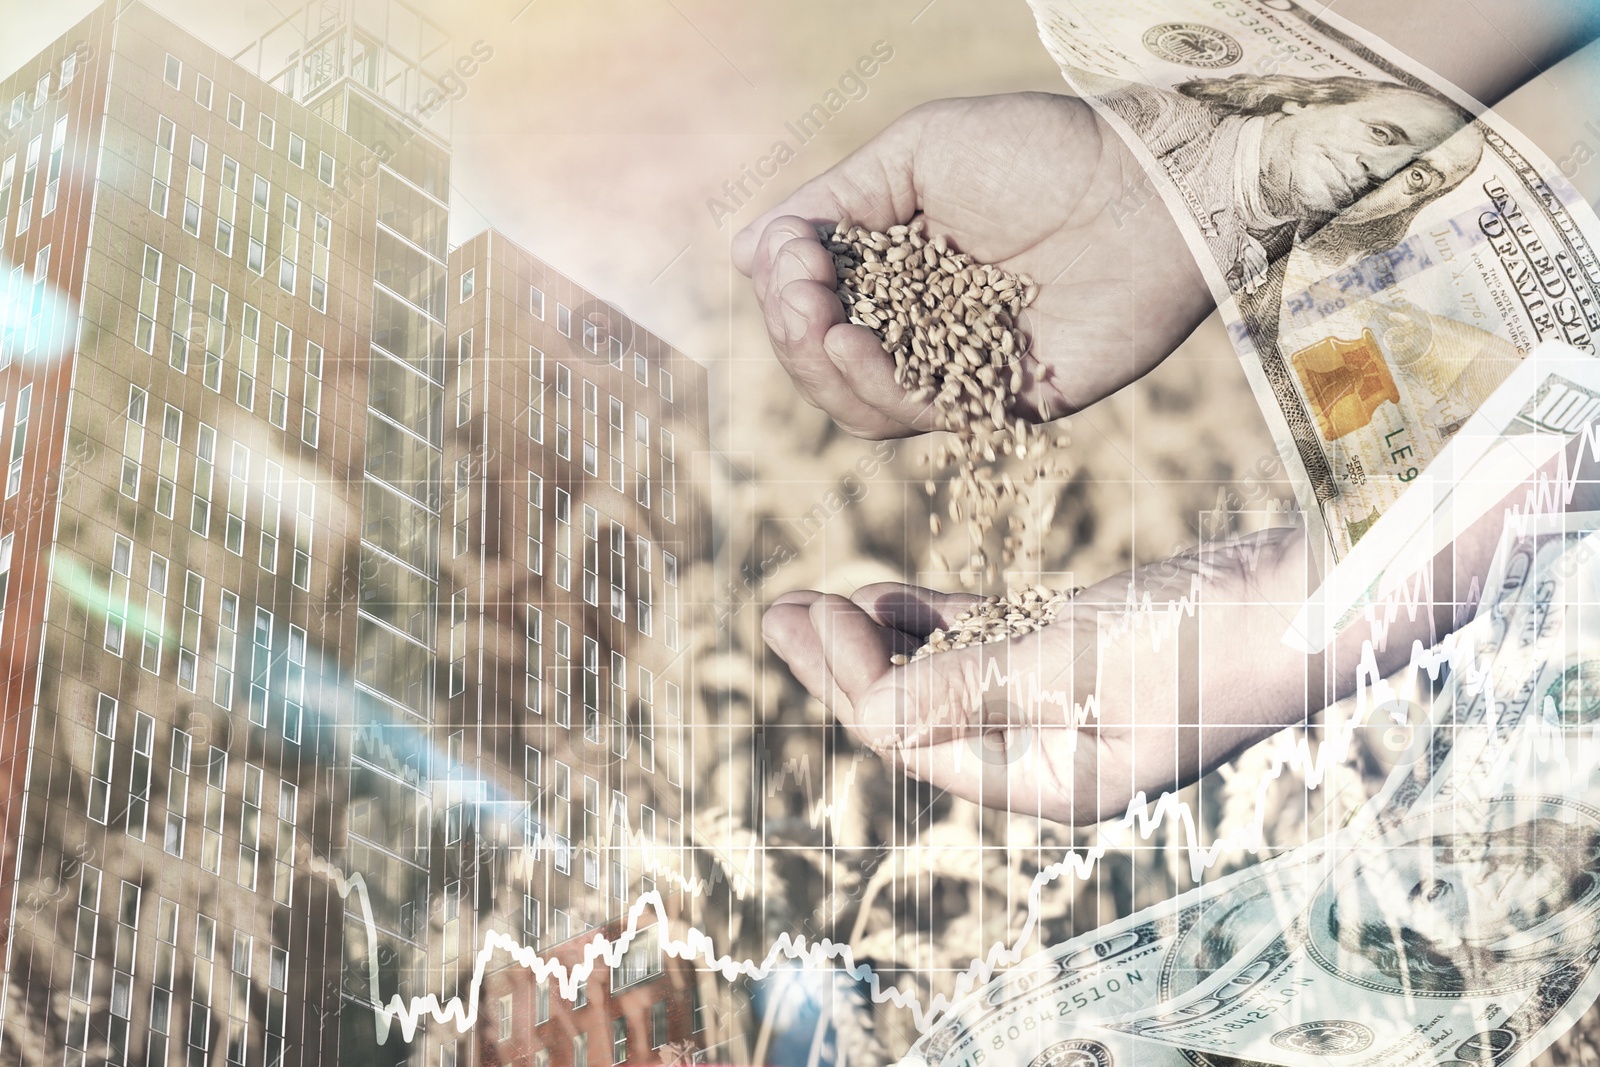 Image of Global grain crisis. Farmer with wheat seeds, dollar bills, office building and graph, multiple exposure